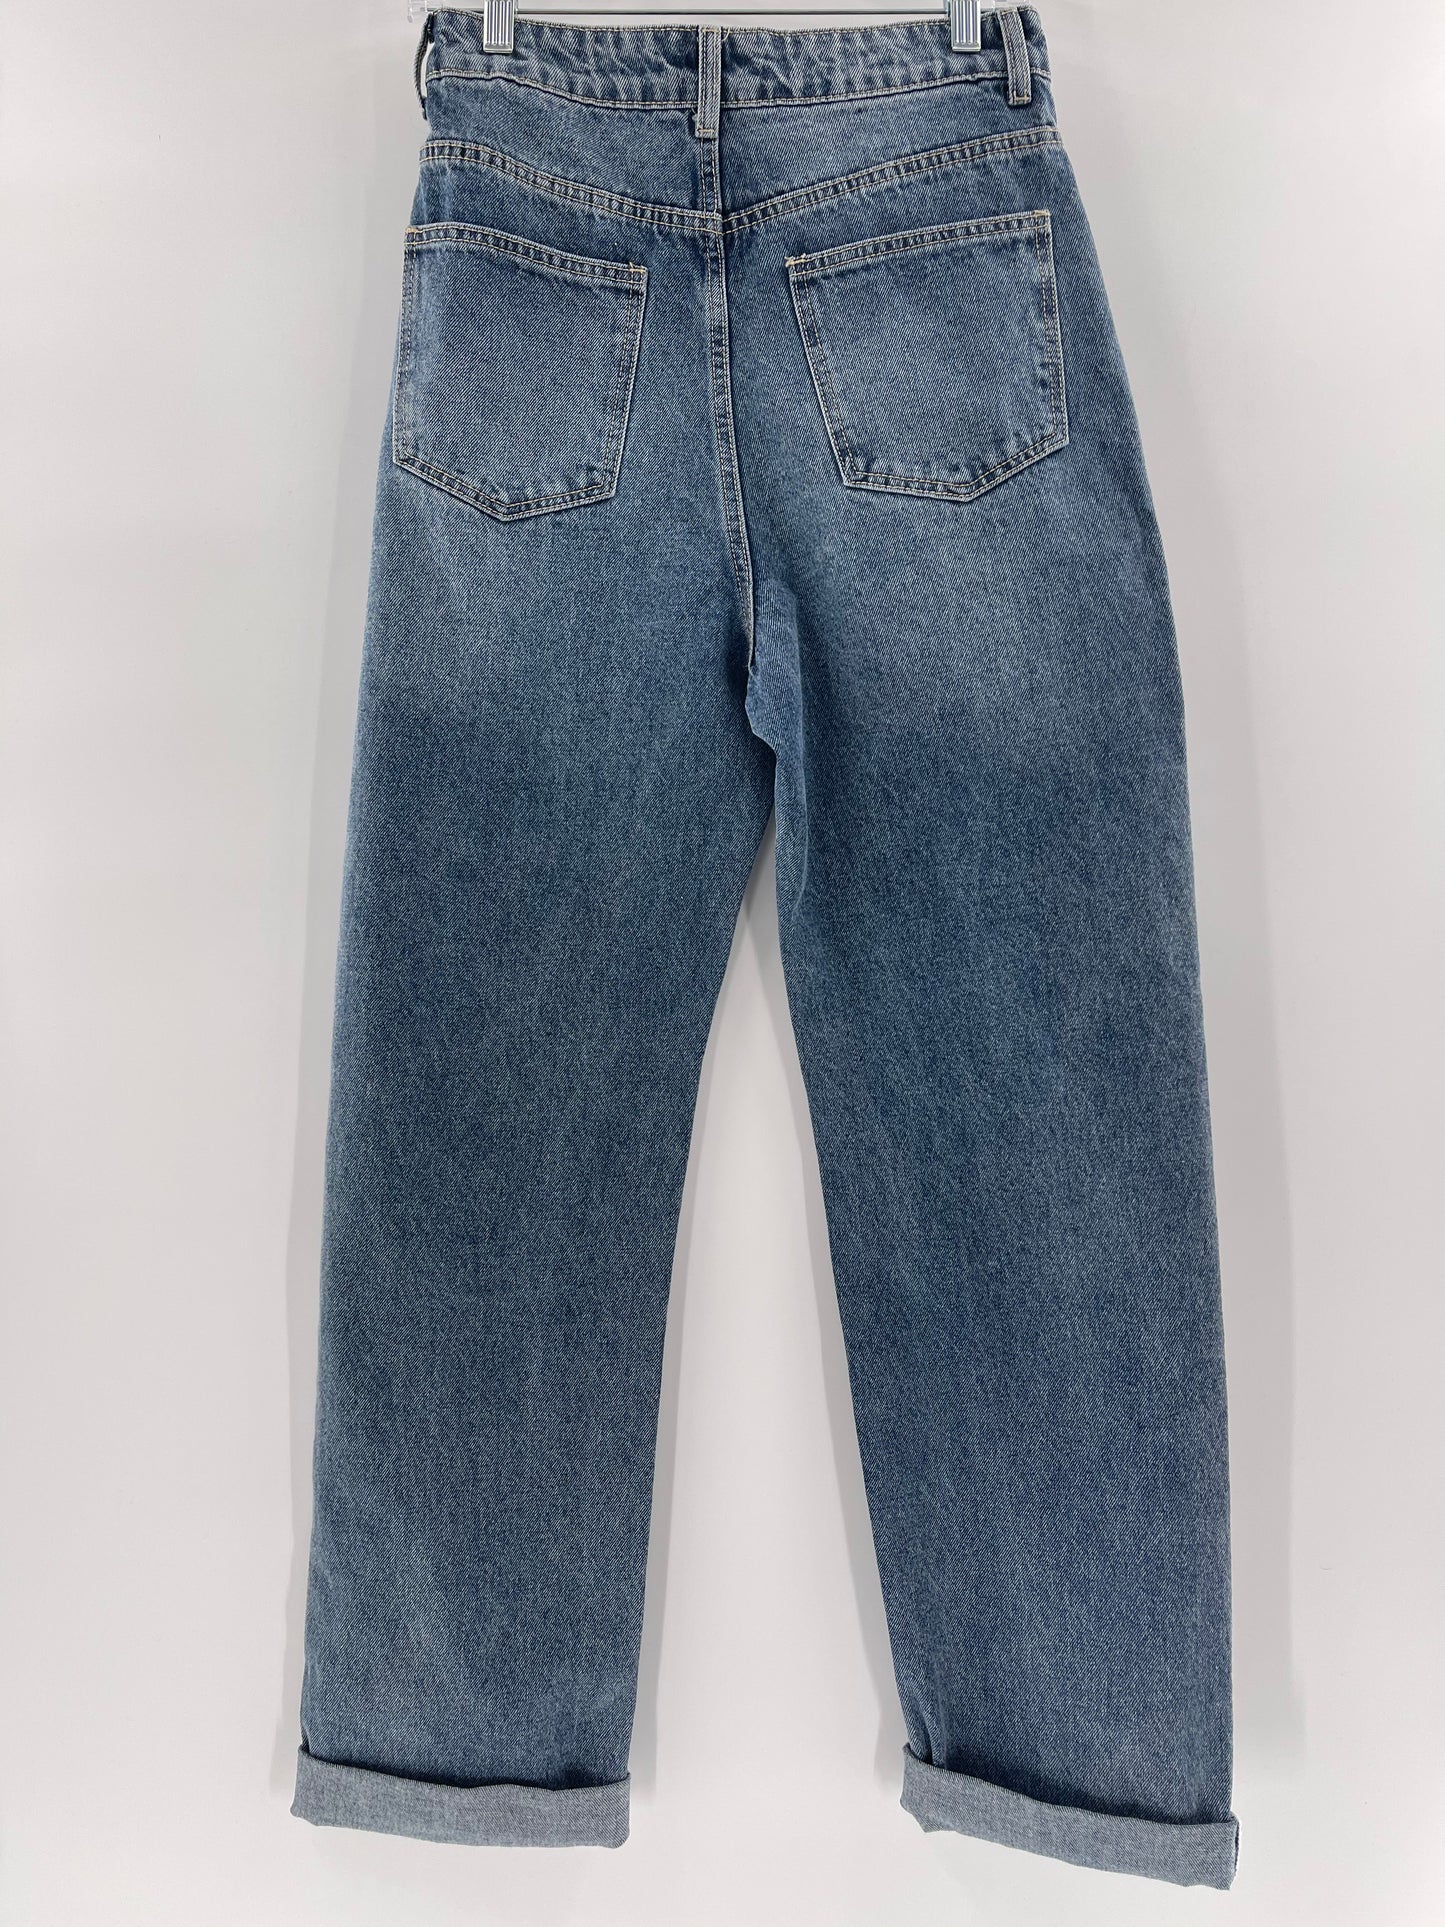 Vintage High Waisted Jeans (Size 25/26)